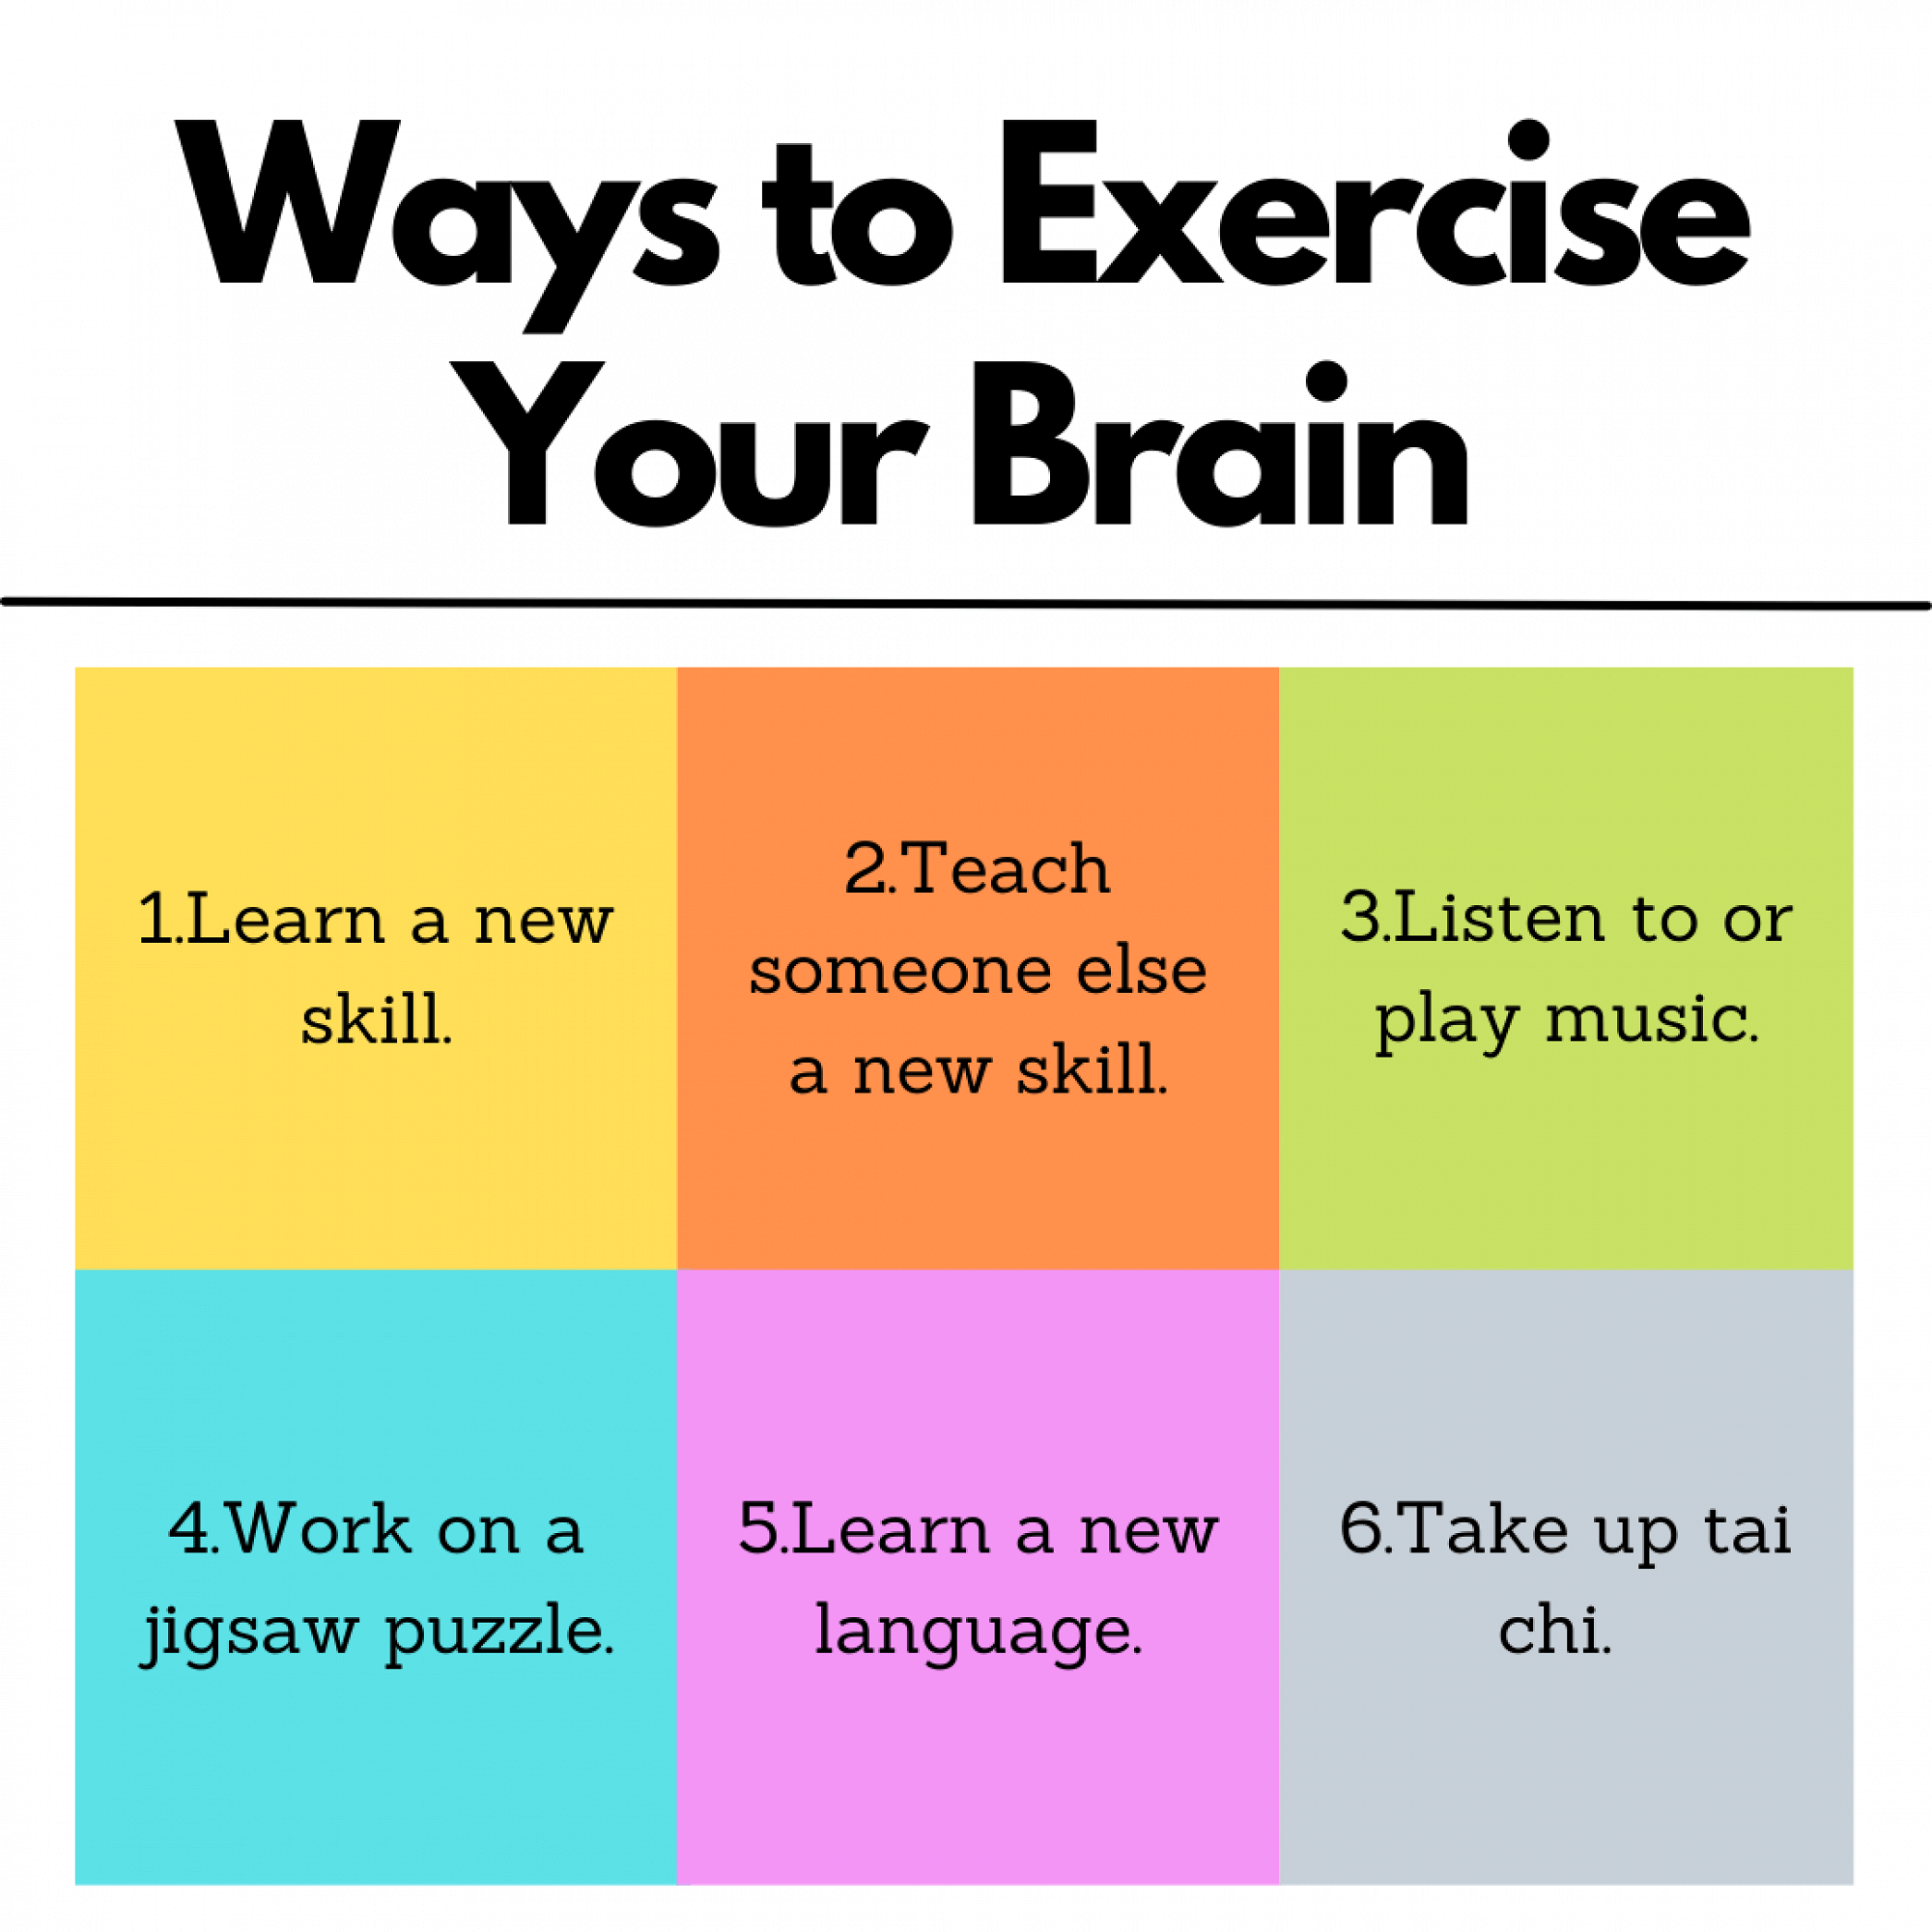 Ways to Exercise Your Brain: Learn a new skill, teach someone else a new skill, listen to or play music, work on a jigsaw puzzle, learn a new language, take up tai chi.